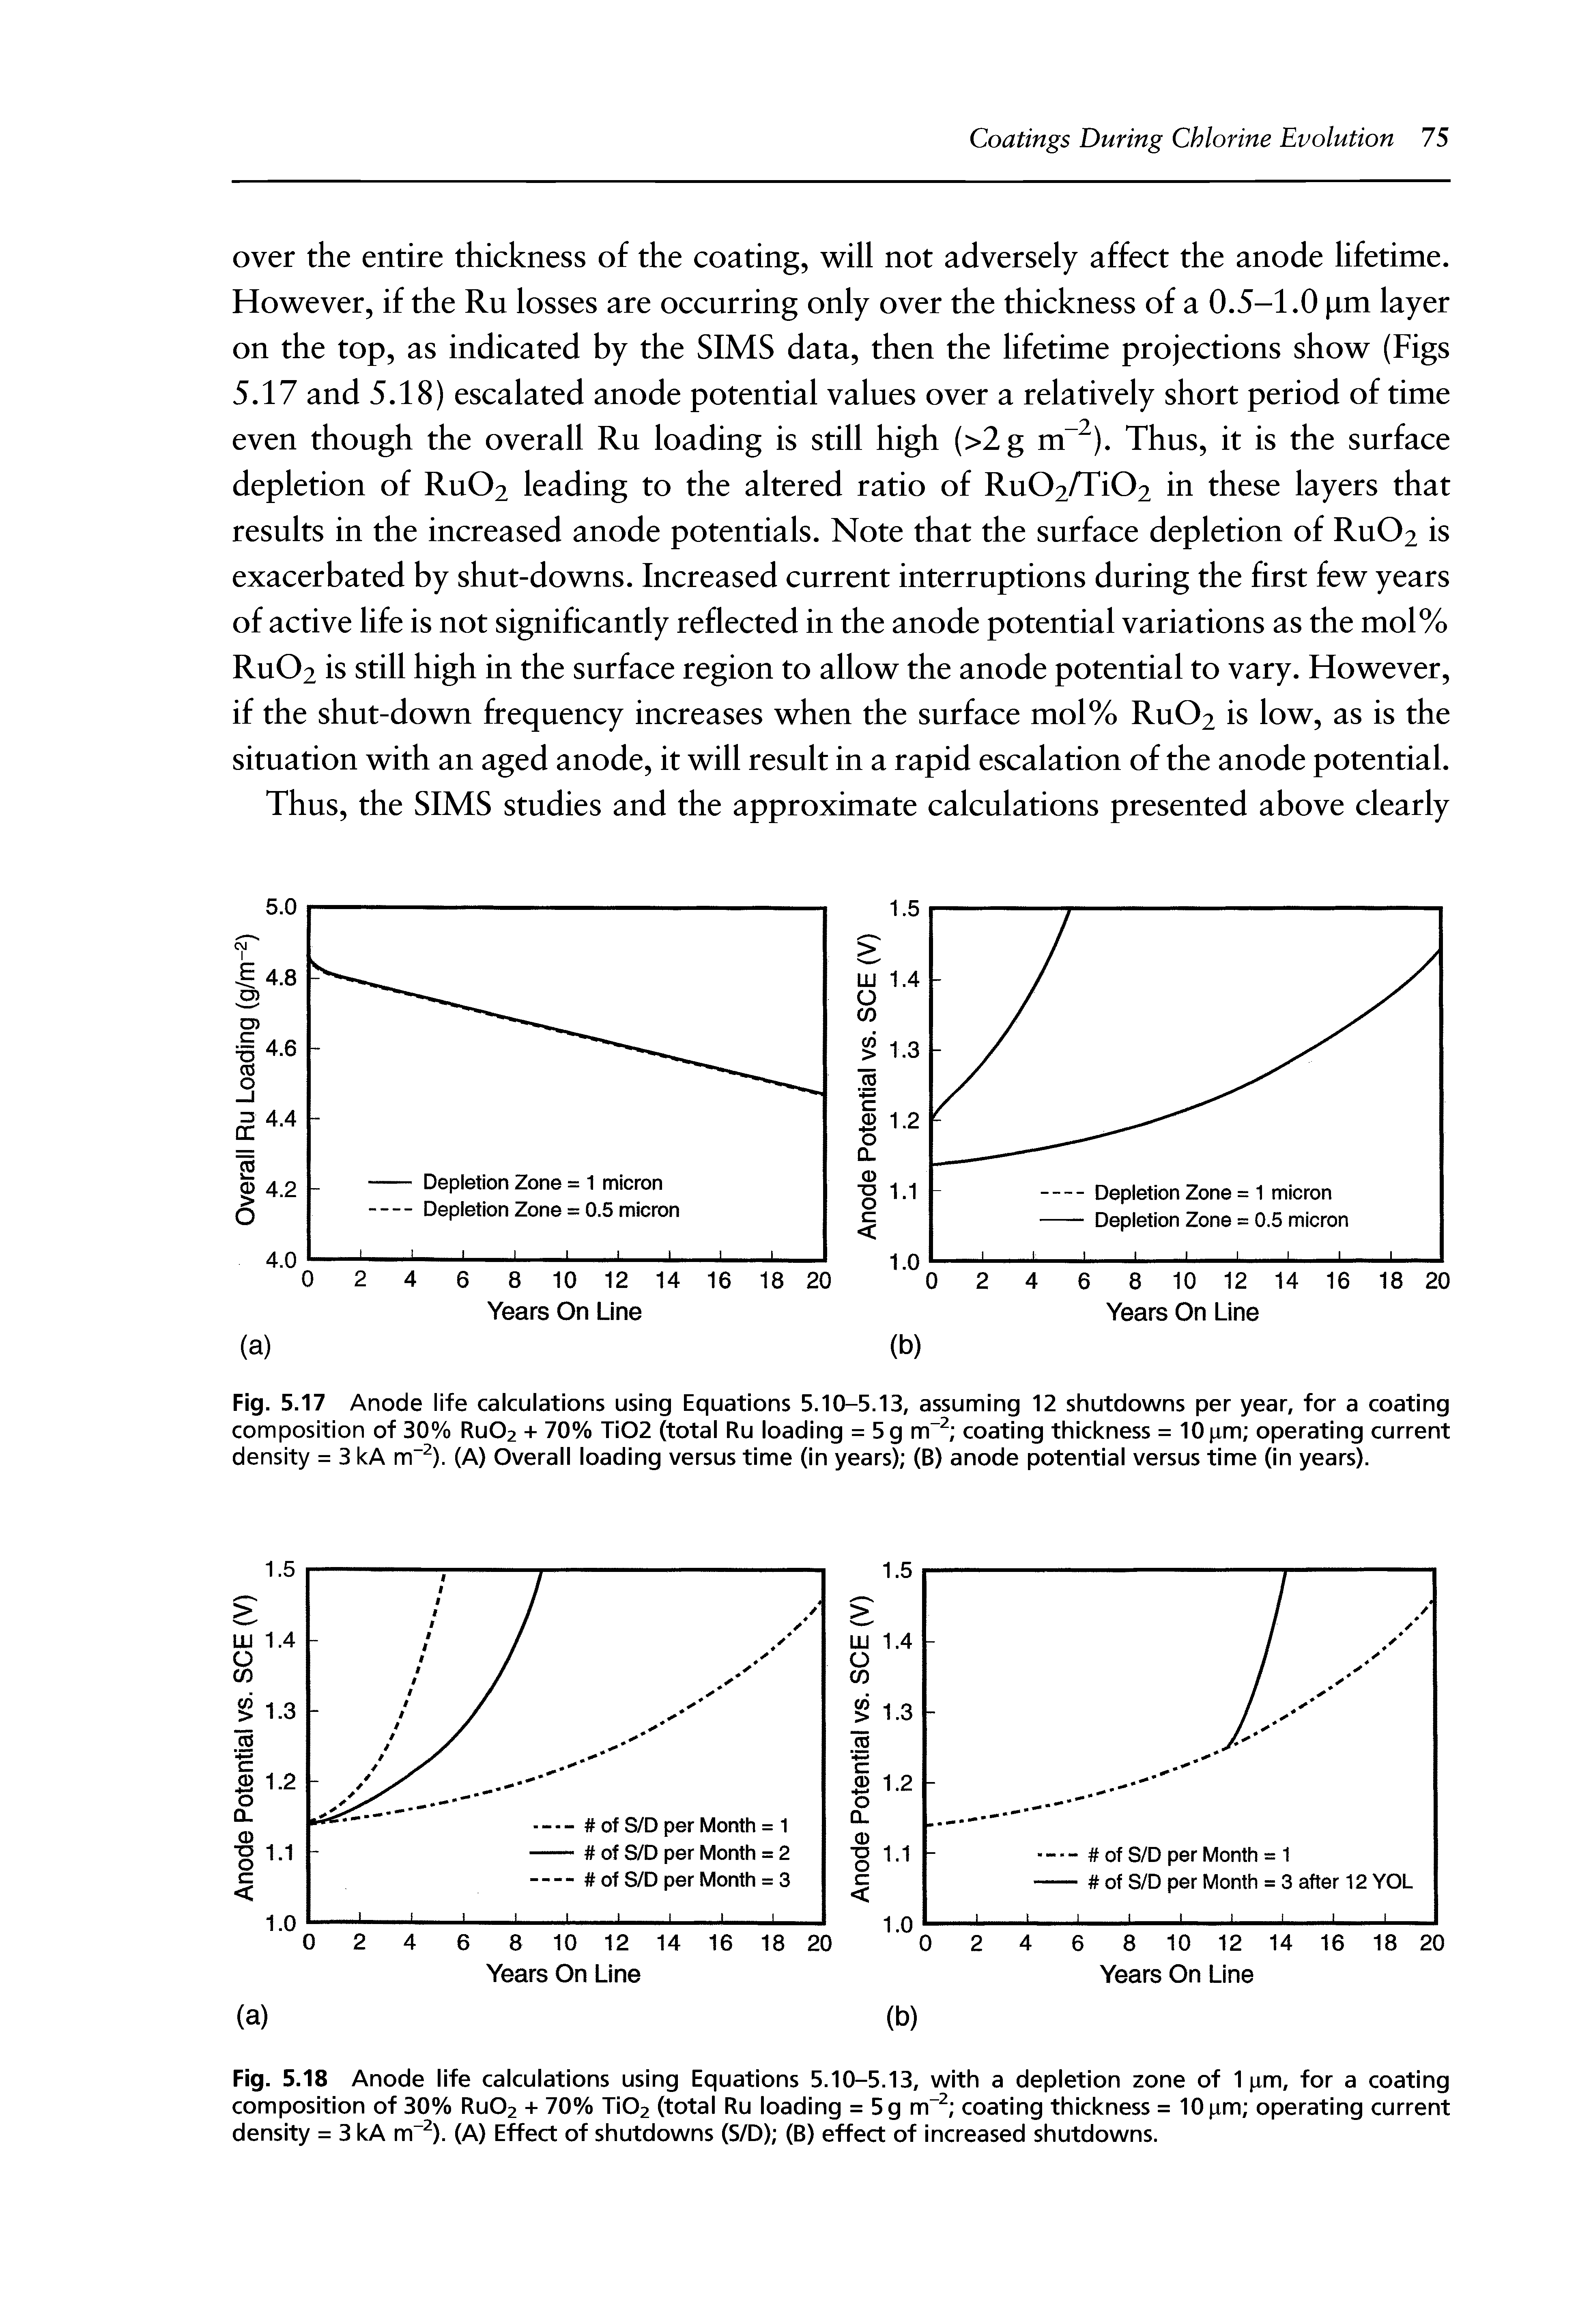 Fig. 5.18 Anode life calculations using Equations 5.10-5.13, with a depletion zone of 1 jim, for a coating composition of 30% Ru02 + 70% Ti02 (total Ru loading = 5g nrT2 coating thickness = 10 jam operating current density = 3 kA nrT2). (A) Effect of shutdowns (S/D) (B) effect of increased shutdowns.